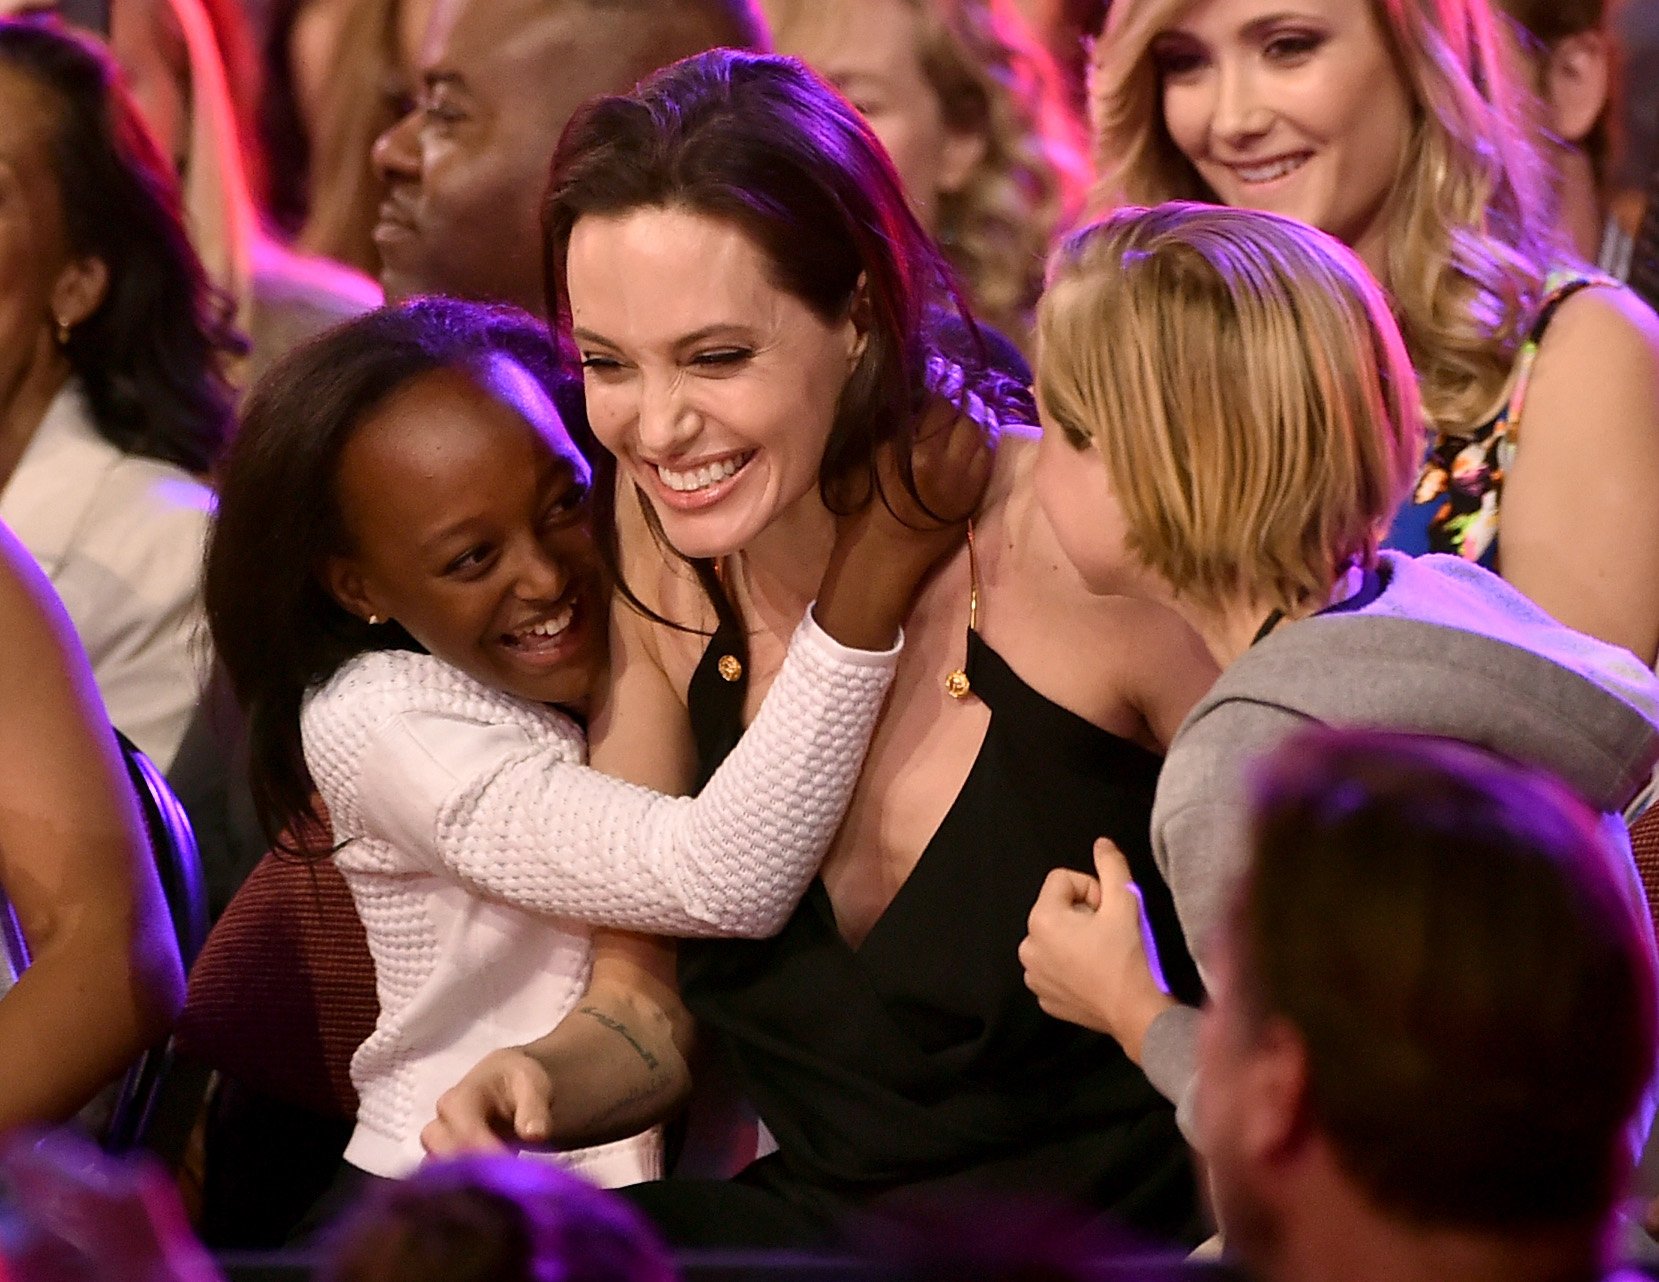 Angelina Jolie, Zahara Marley Jolie-Pitt, and Shiloh Nouvel Jolie-Pitt on March 28, 2015 in Inglewood, California | Photo: Getty Images